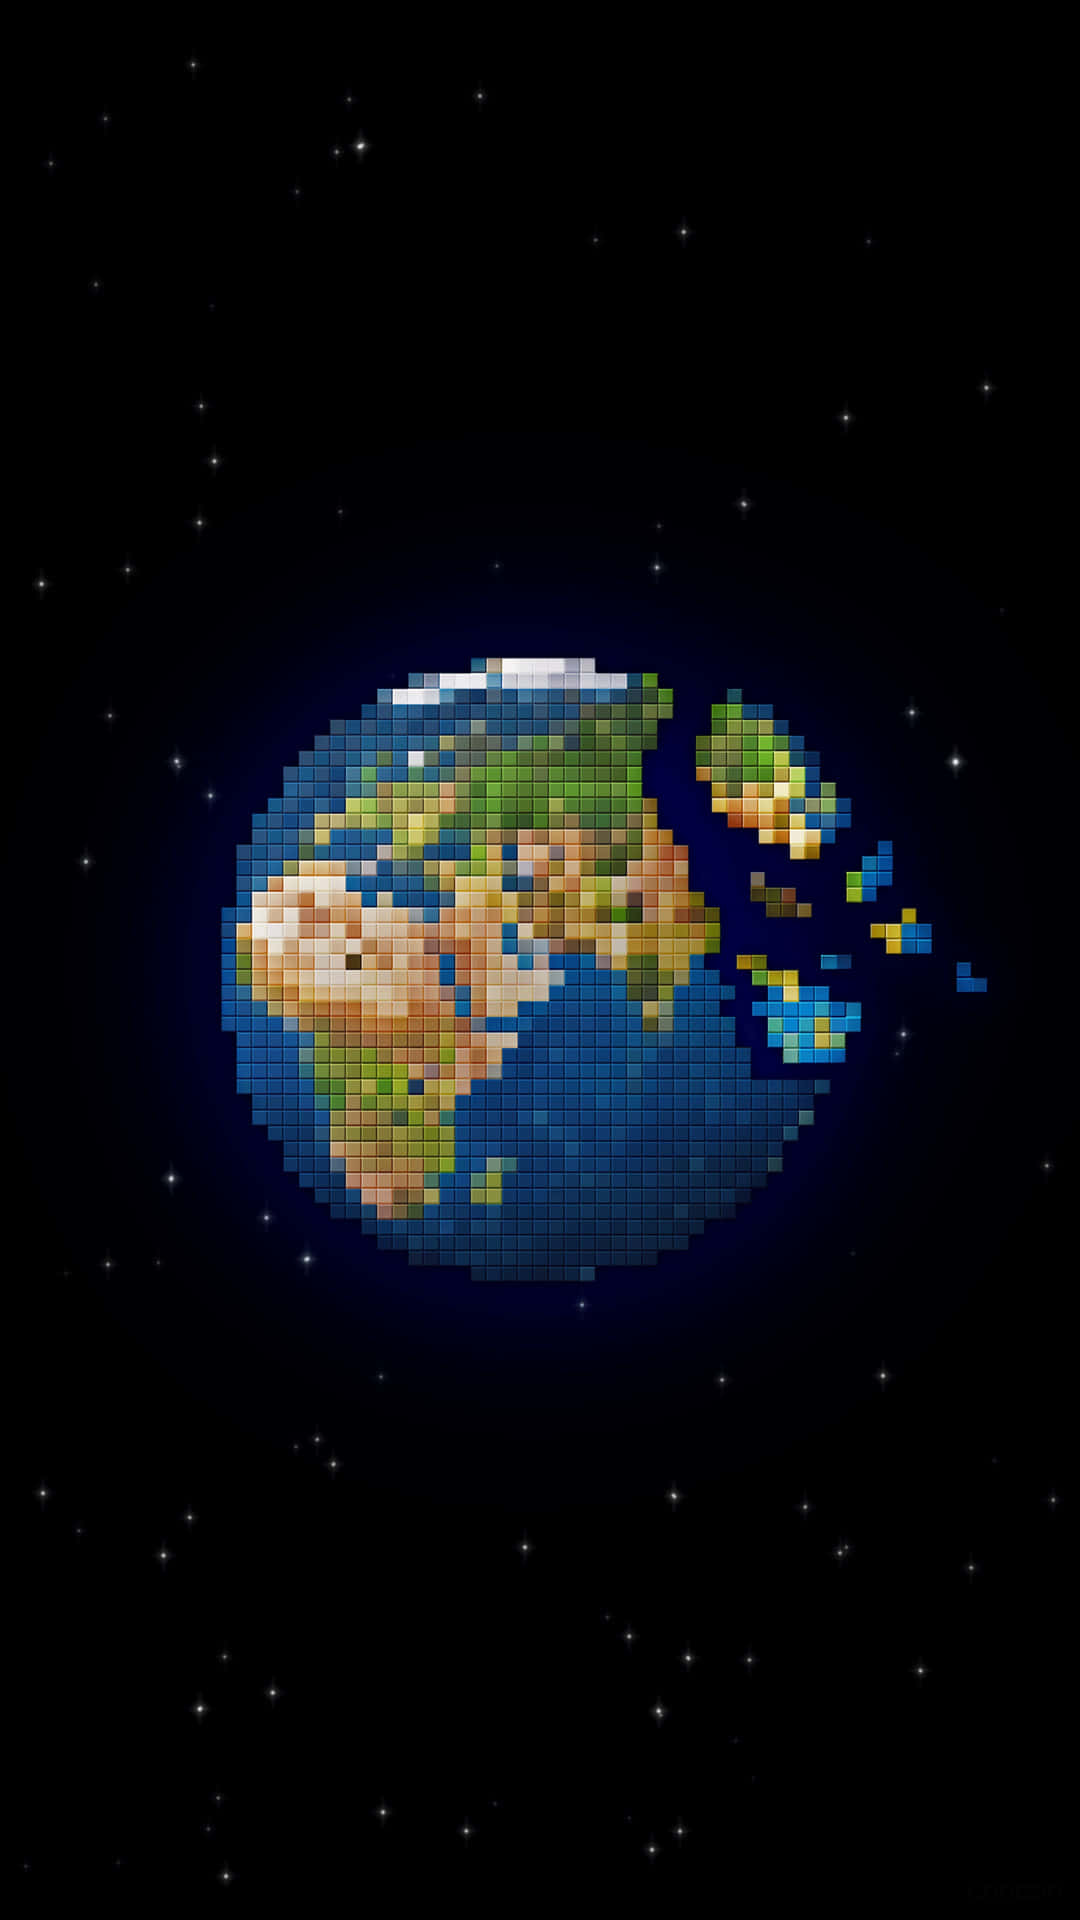 Pixelated Earth Starry Background Wallpaper